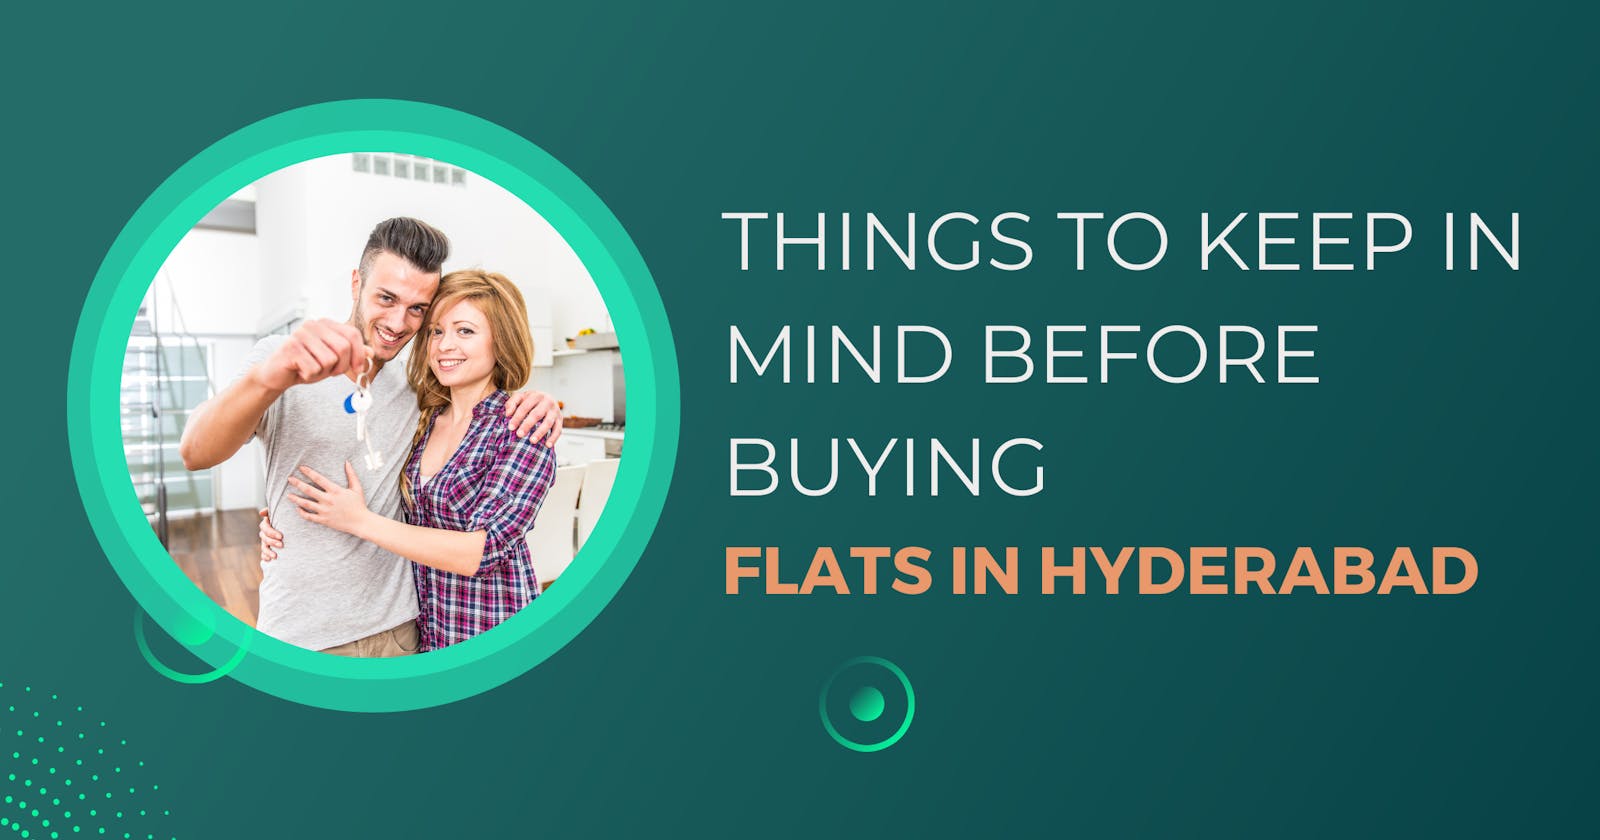 Things to keep in Mind before Buying Flats in Hyderabad